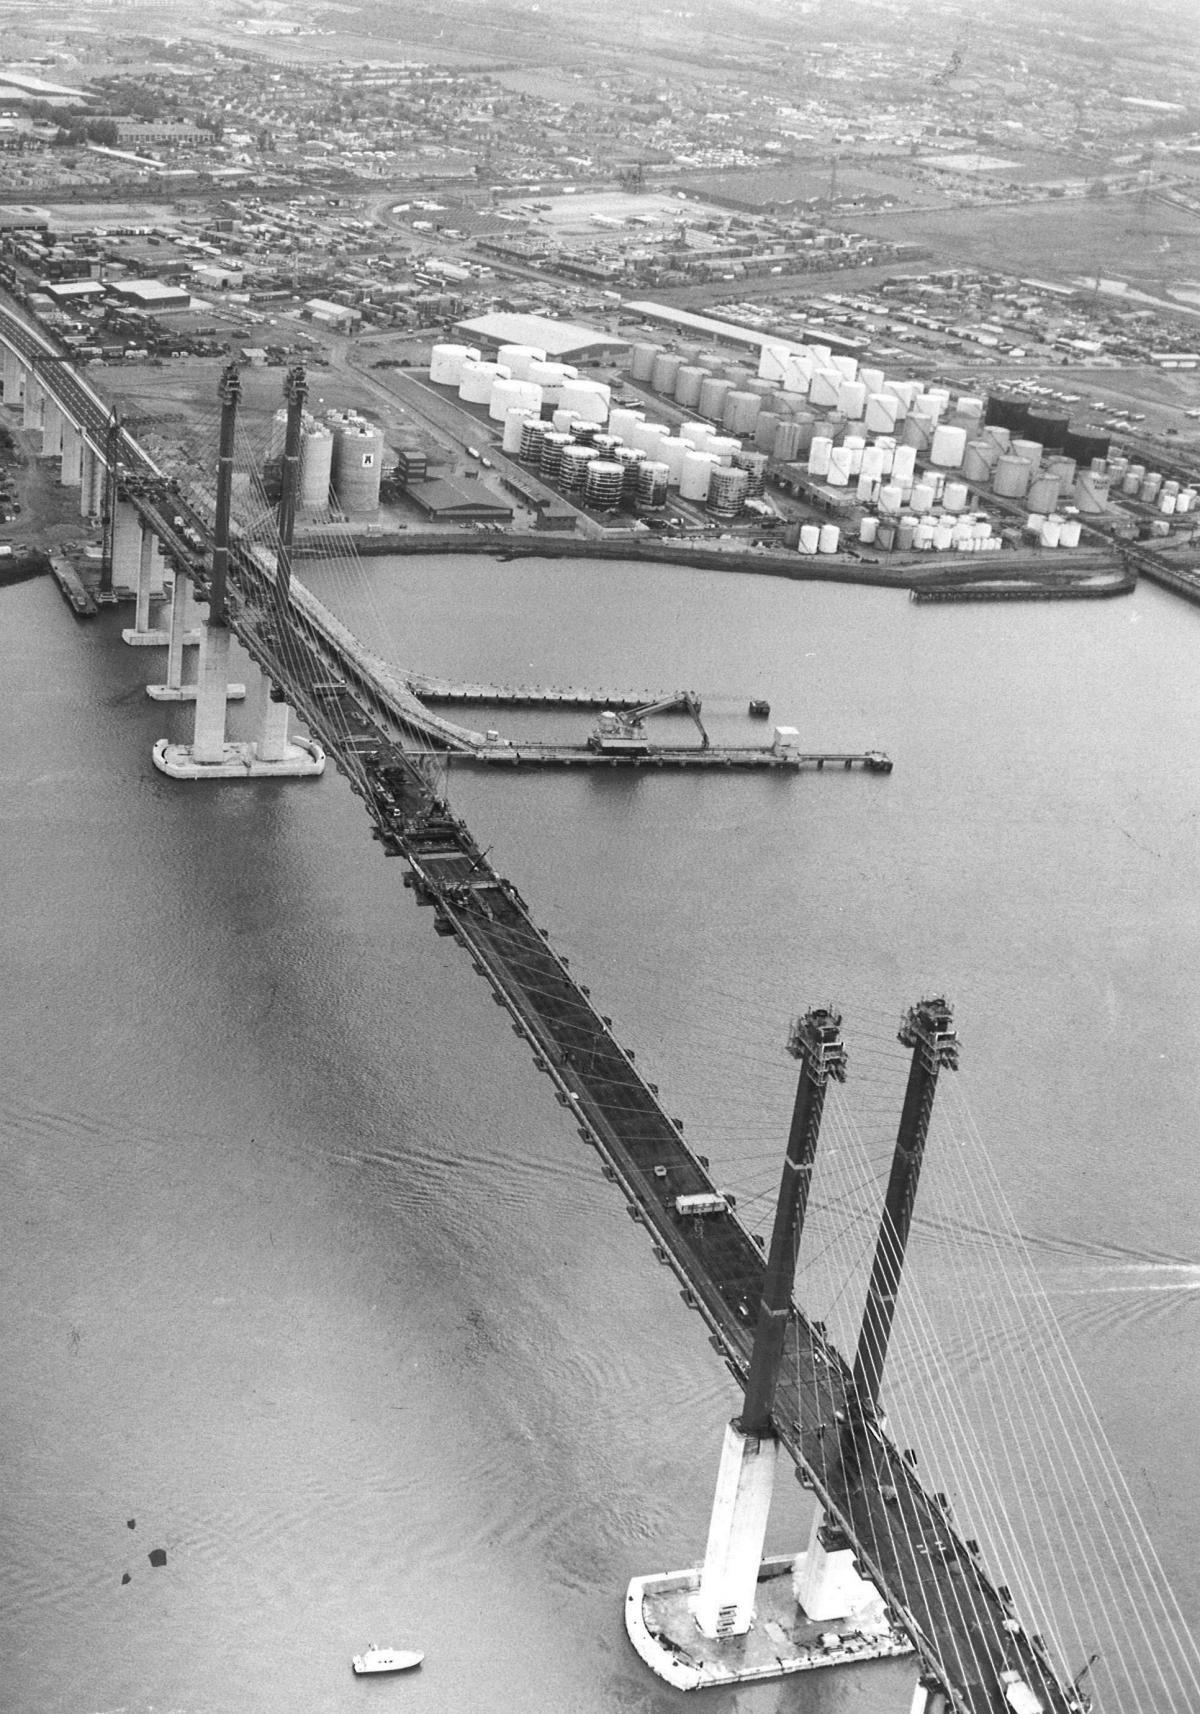 Link road - the QEII bridge provided an extra crossing in addition to the existing tunnels